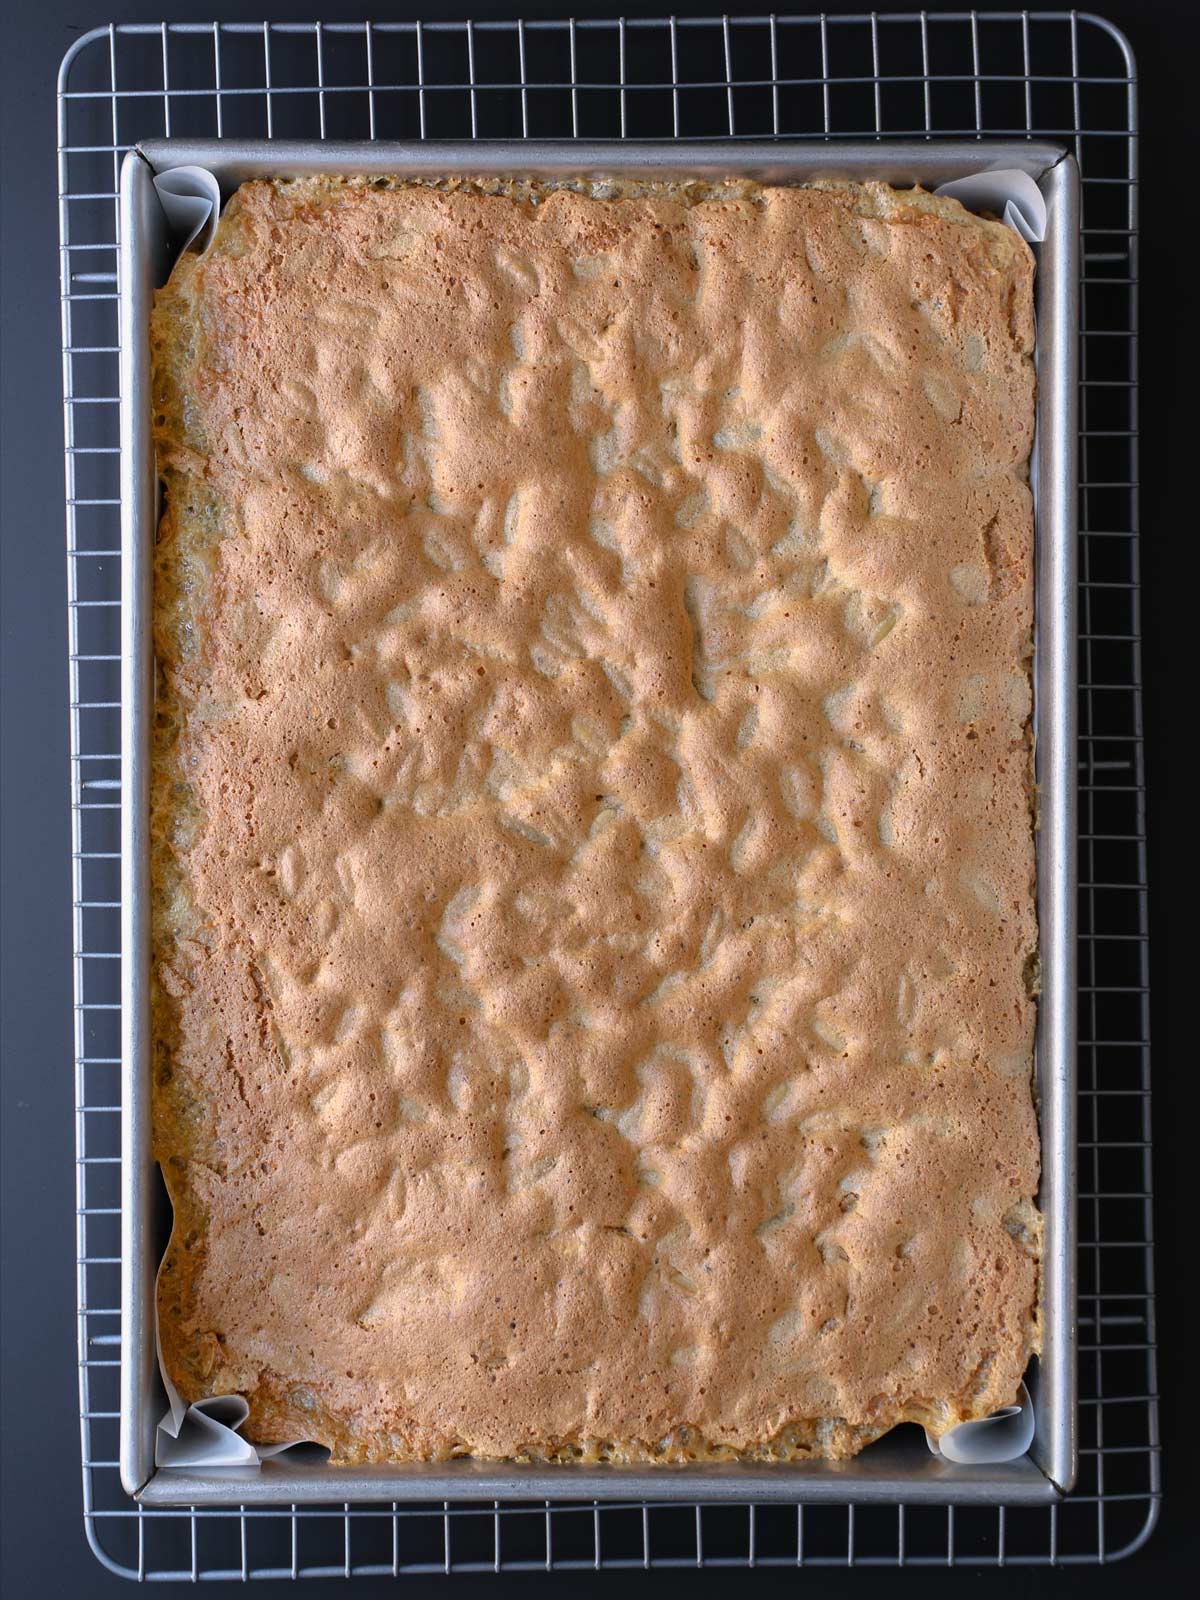 brown sugar bars baked in pan and cooling on rack.